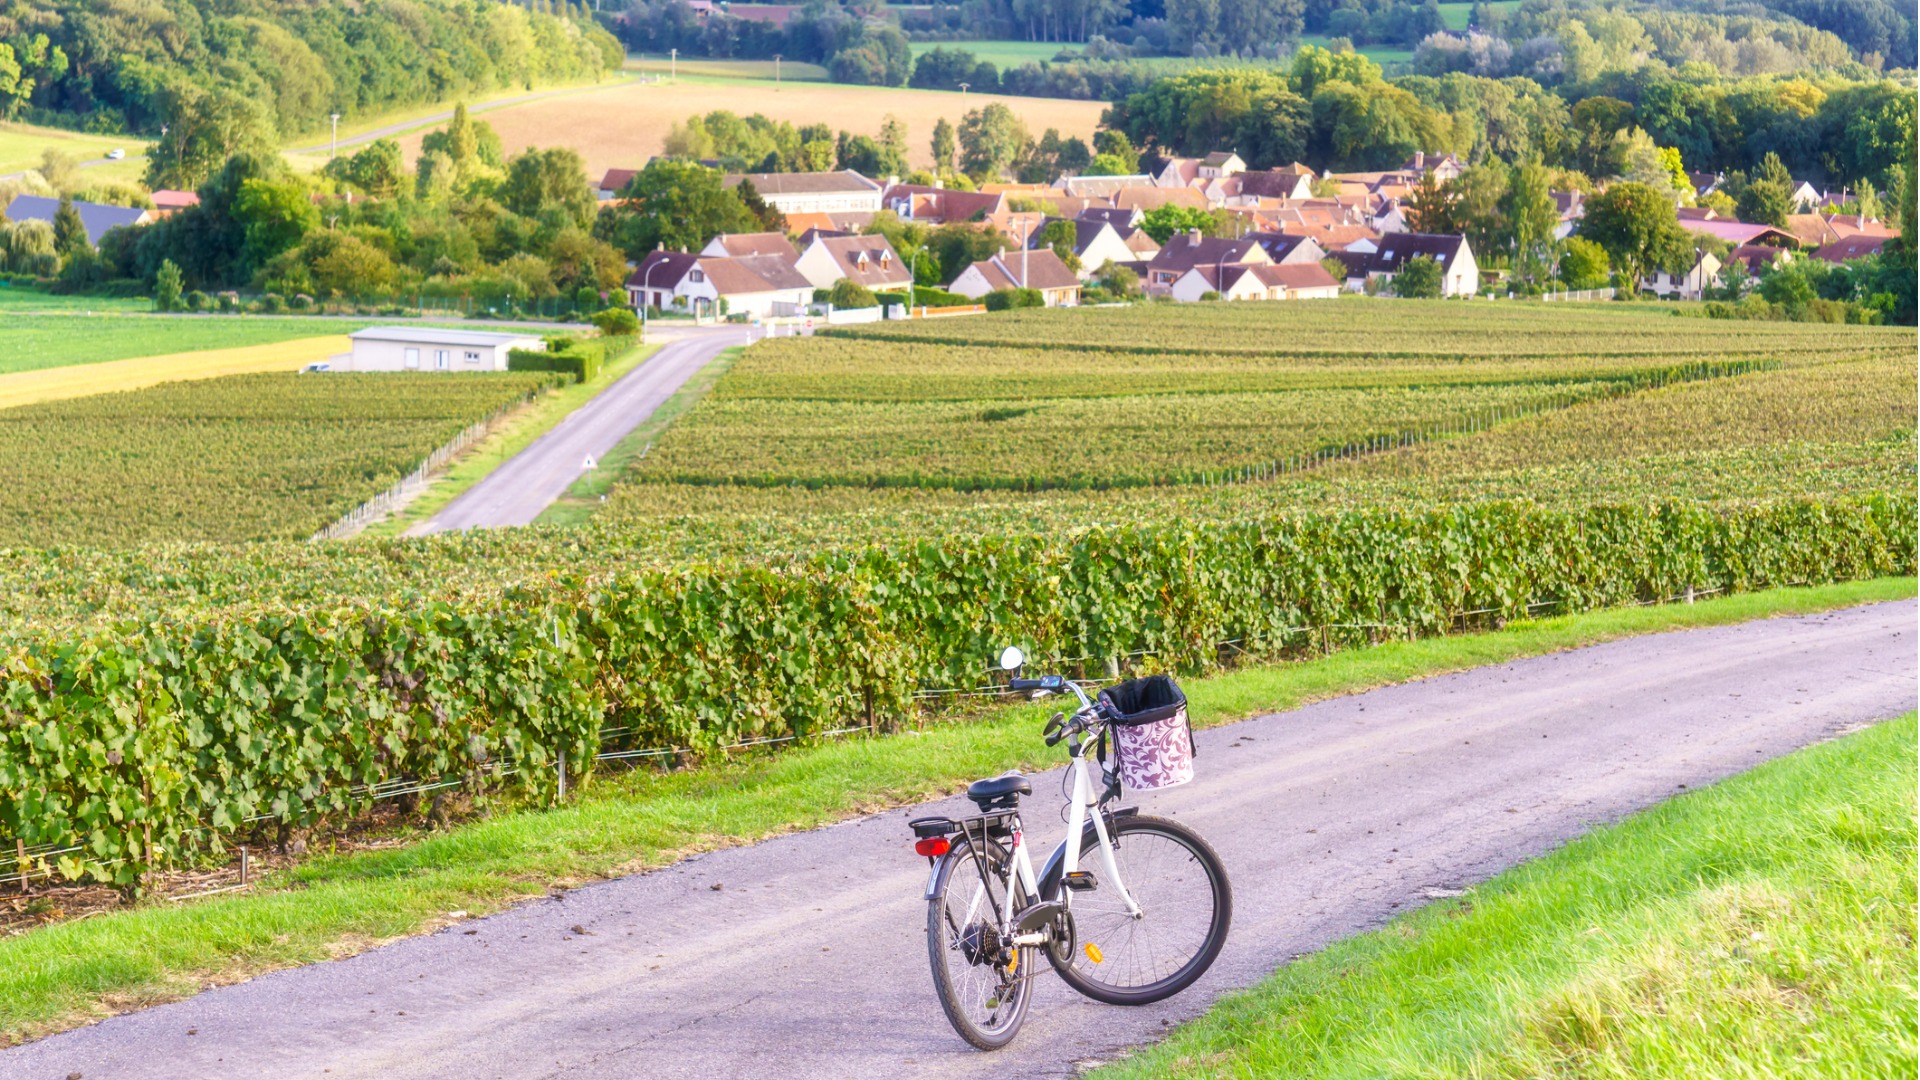 Photo - Photo gallery bicycle on the road on row vine green grape in champagne vineyards at picture id869551080